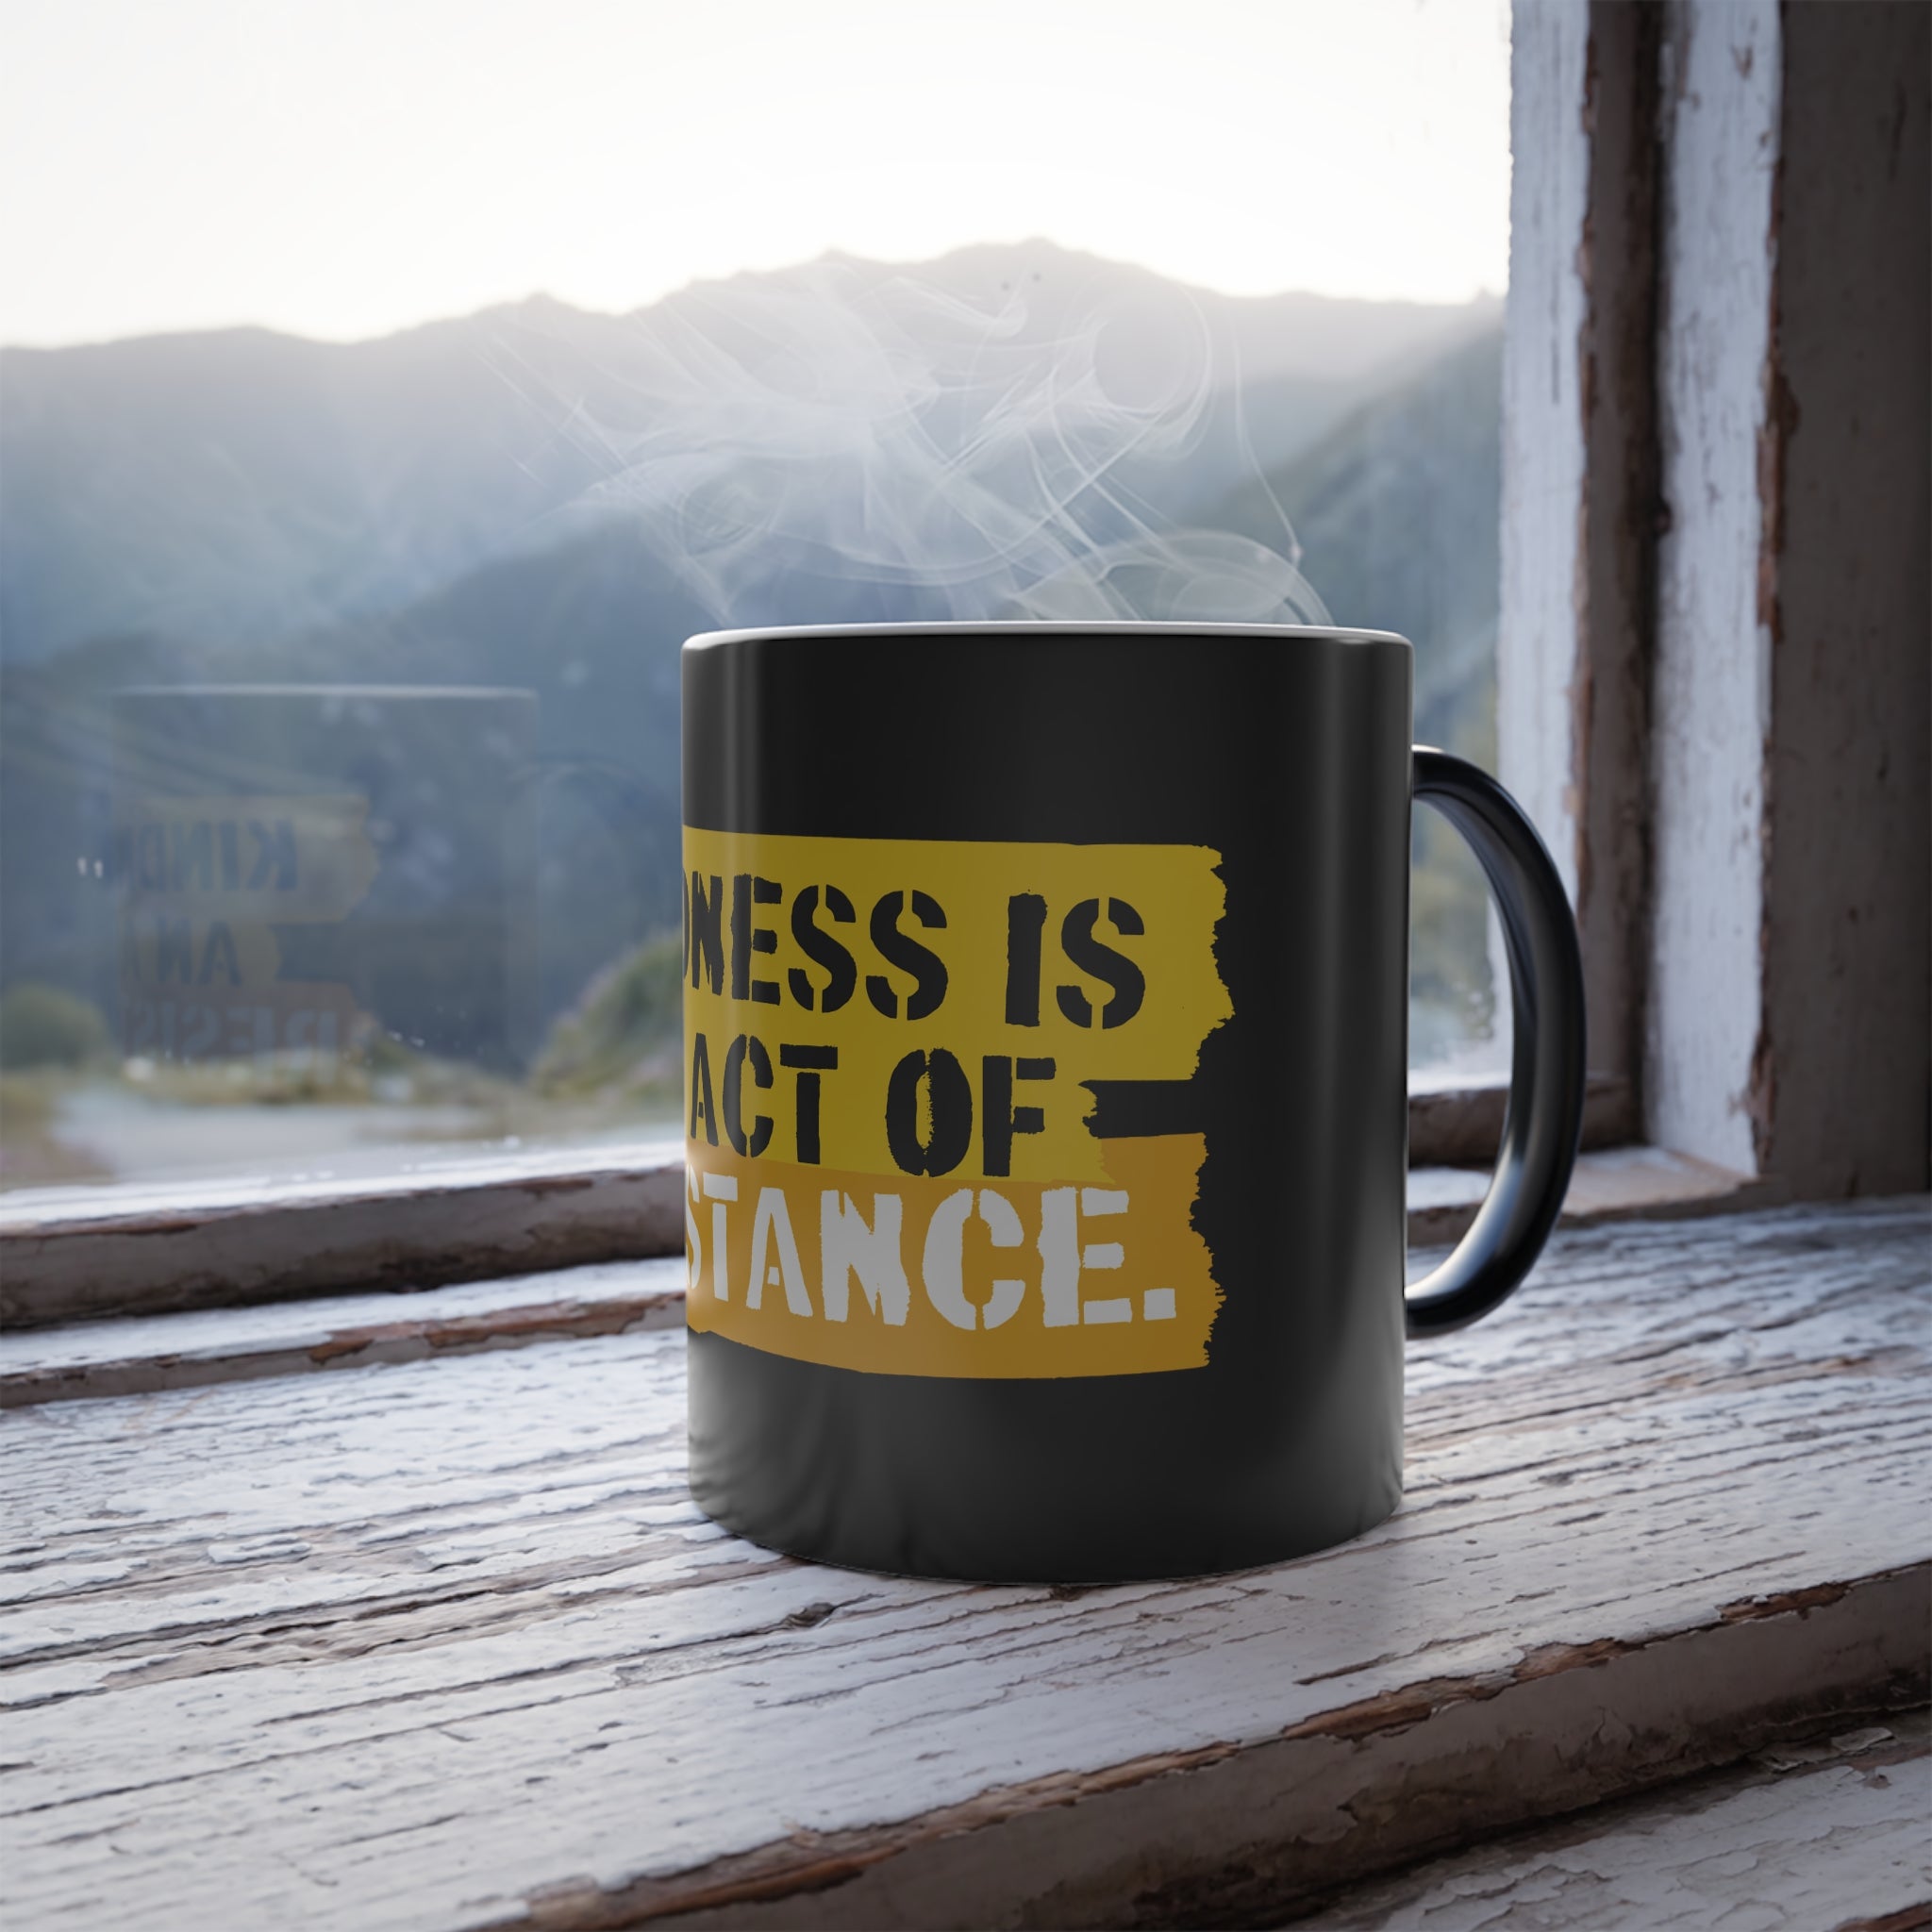 Kindness is An Act of Resistance : Color-Changing Ceramic Mug, 11oz